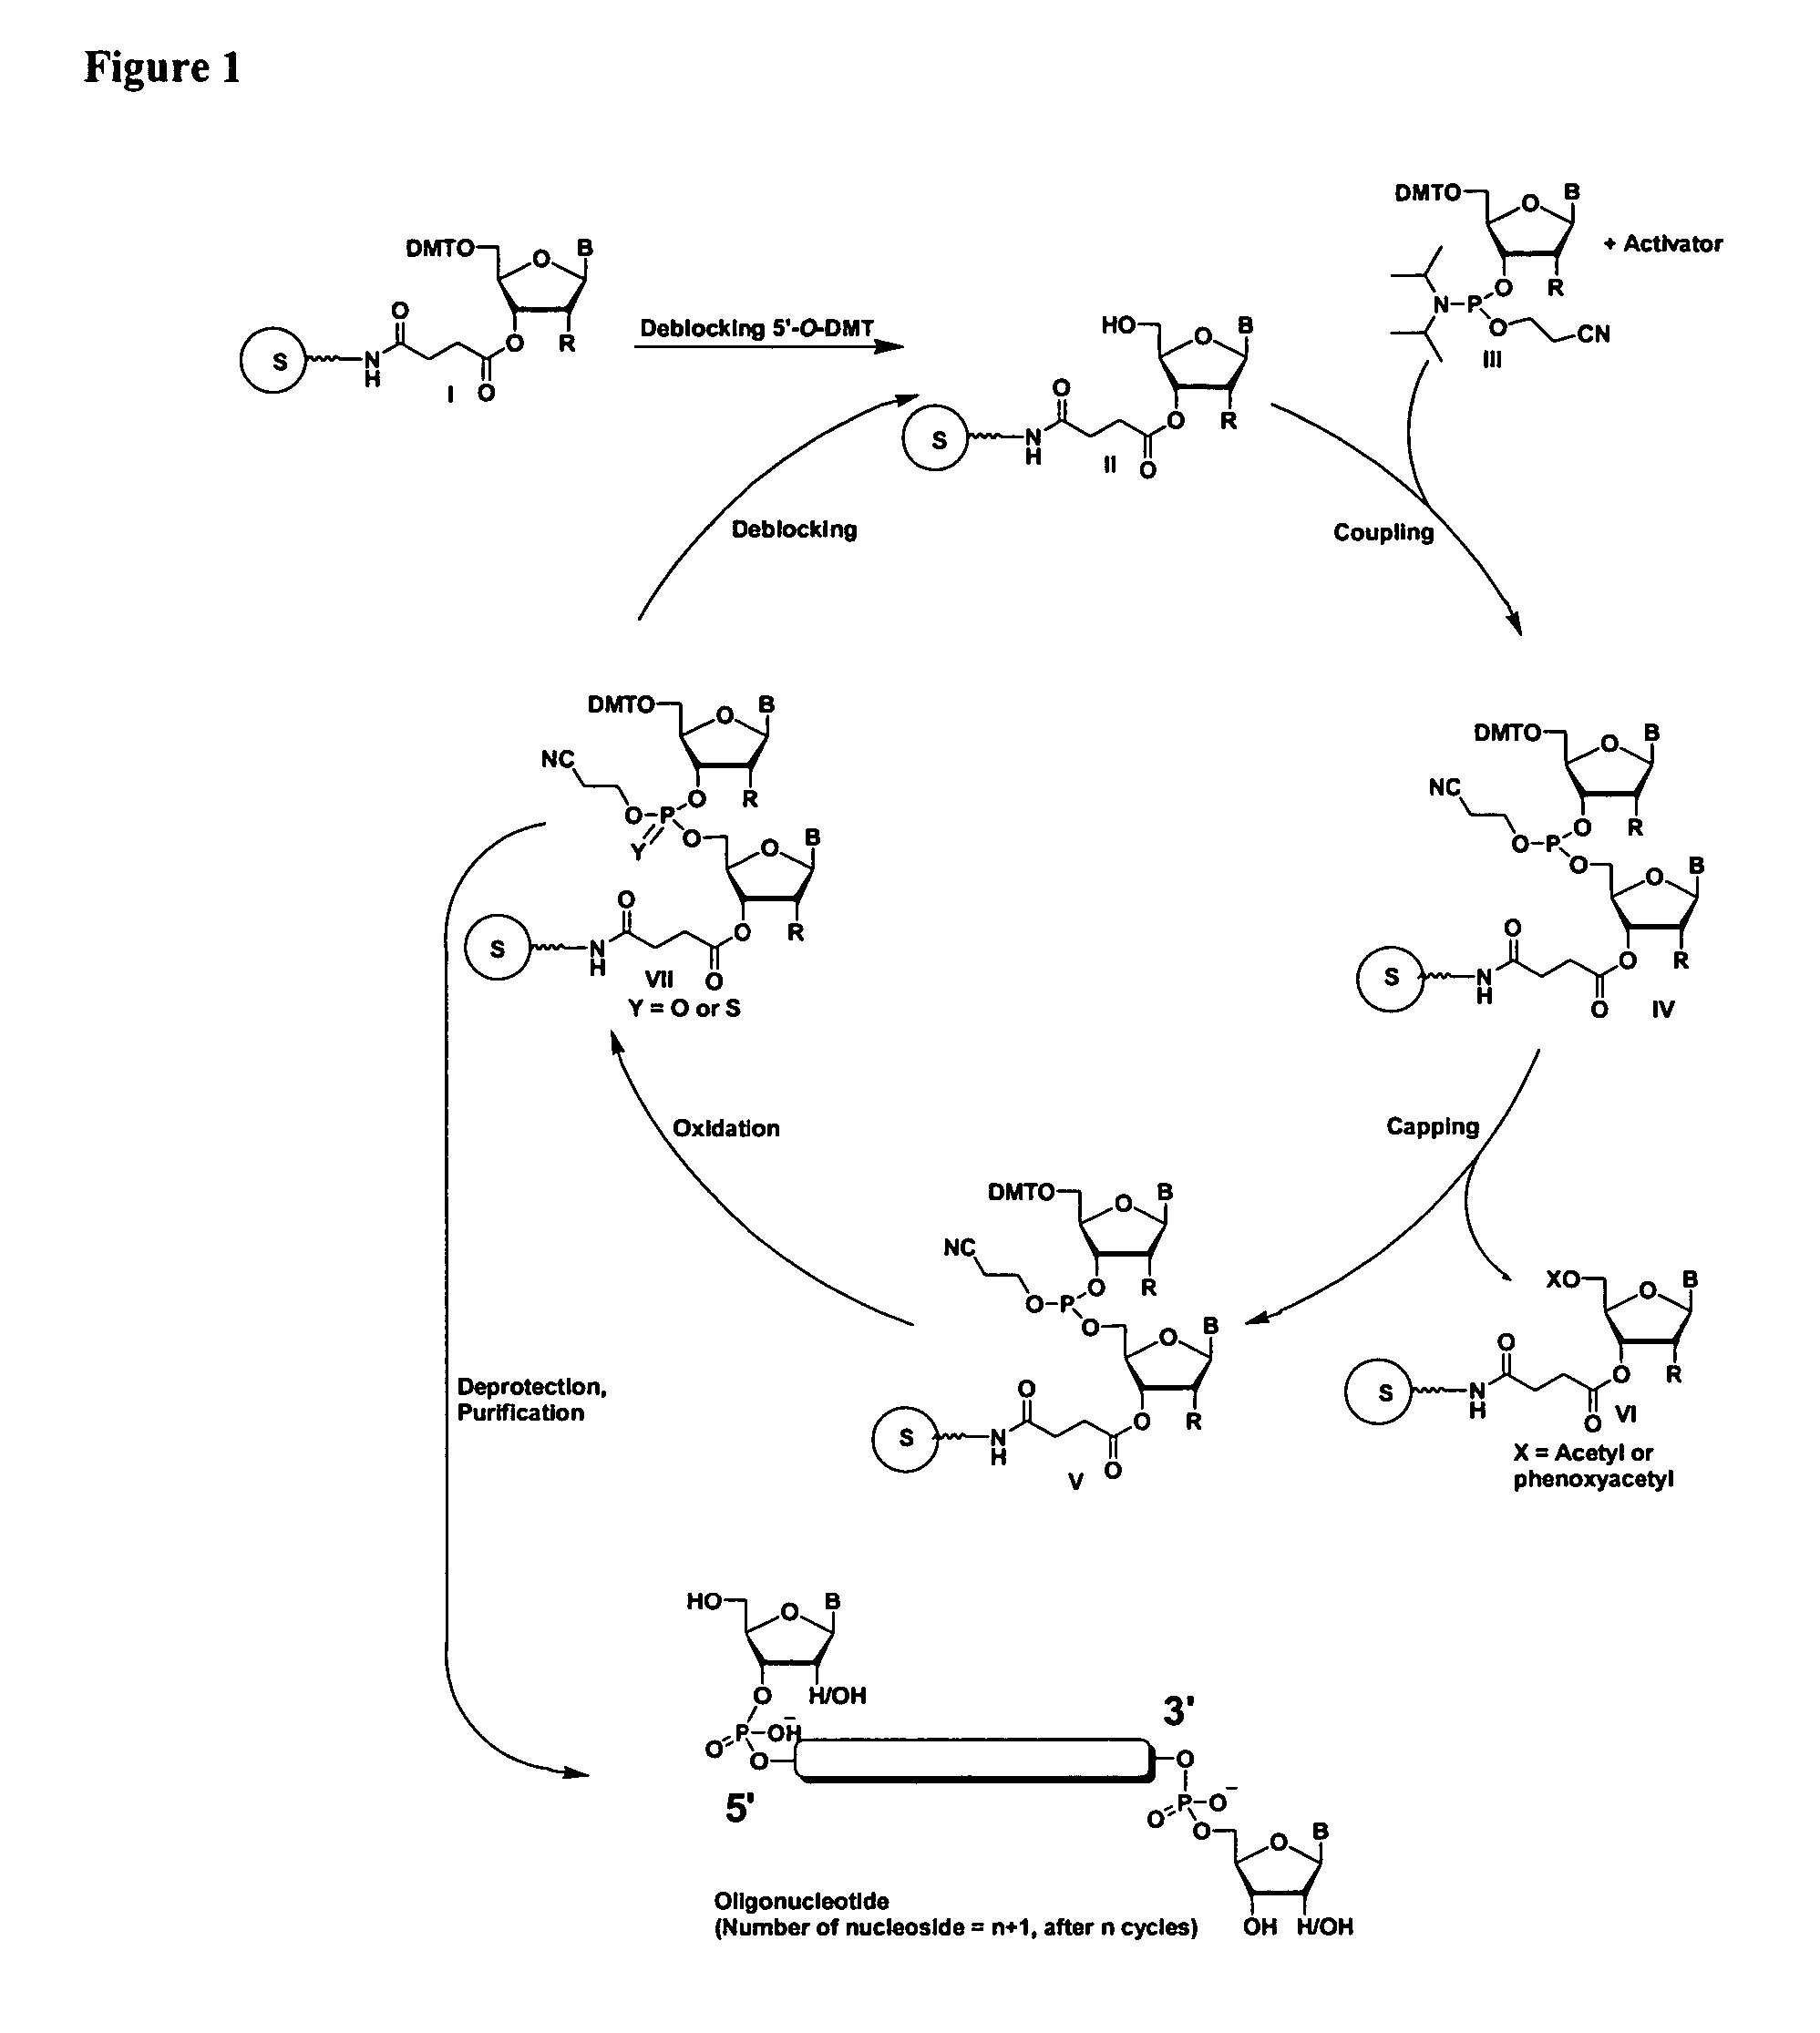 Oligonucleotides comprising a modified or non-natural nucleobase